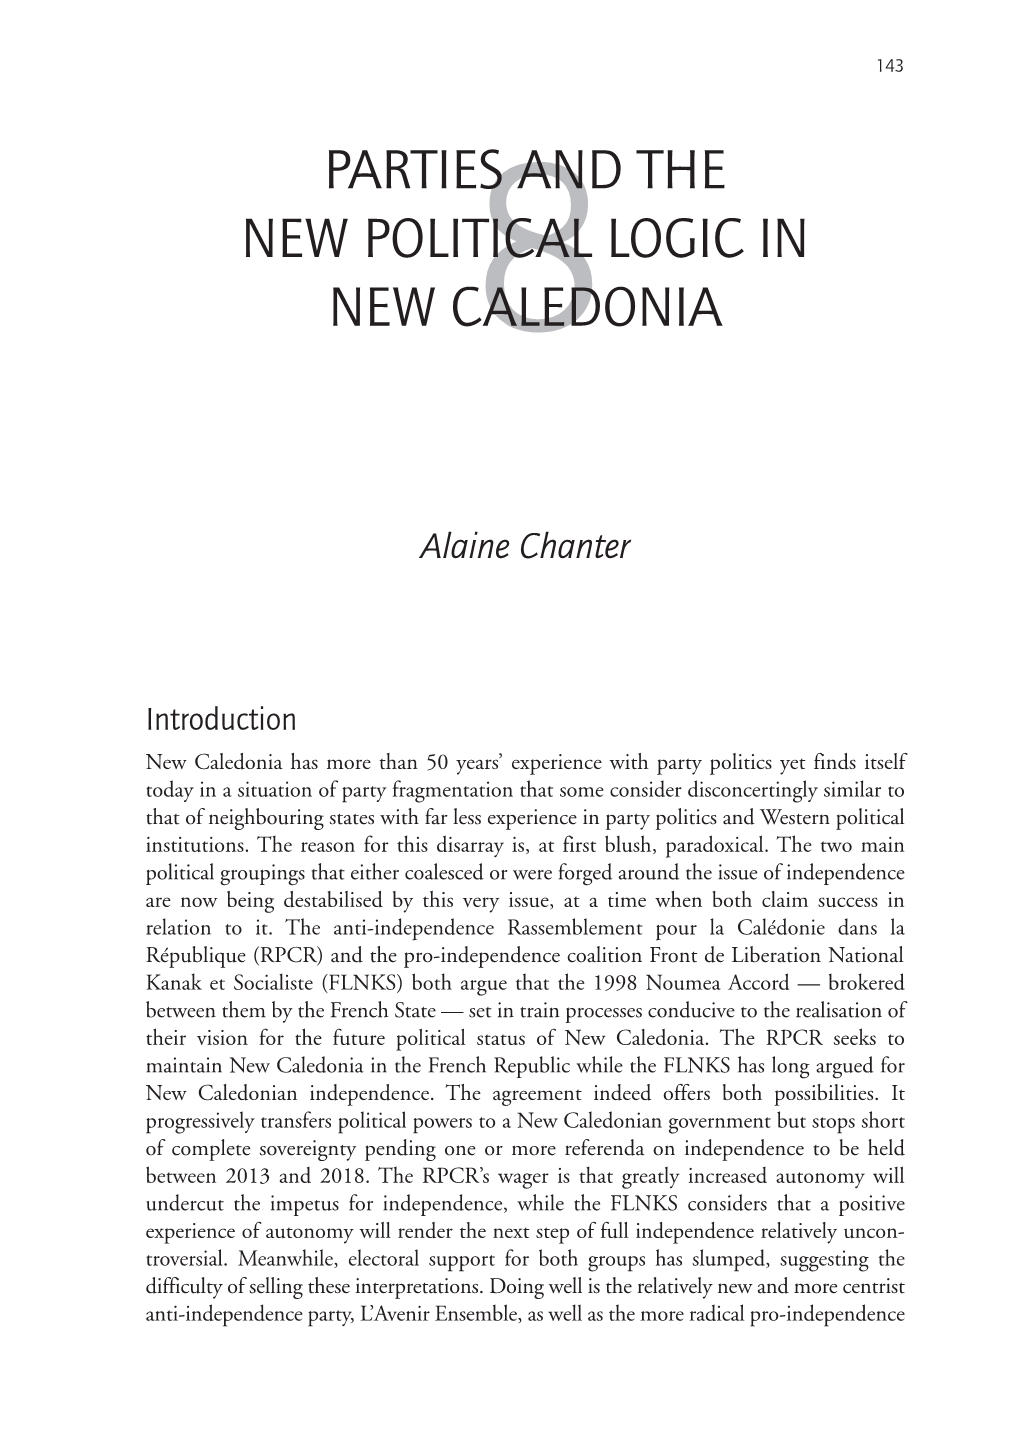 Parties and the New Political Logic in New Caledonia8